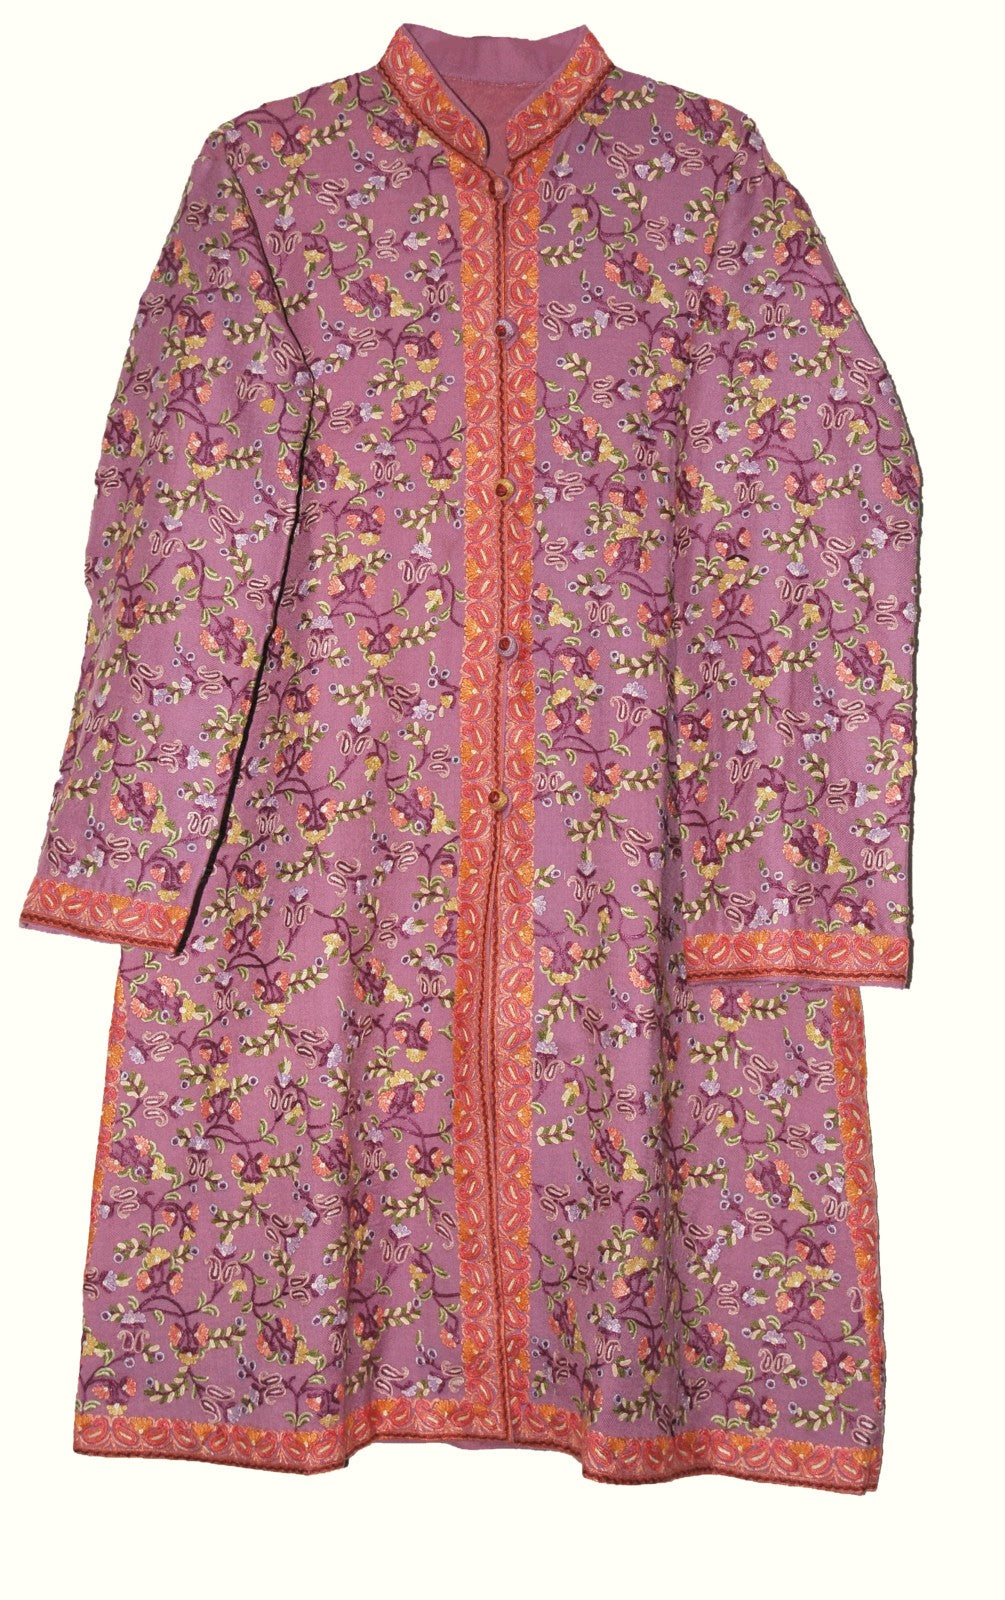 Woolen Coat Long Jacket Dull Pink, Multicolor Embroidery #AO-165